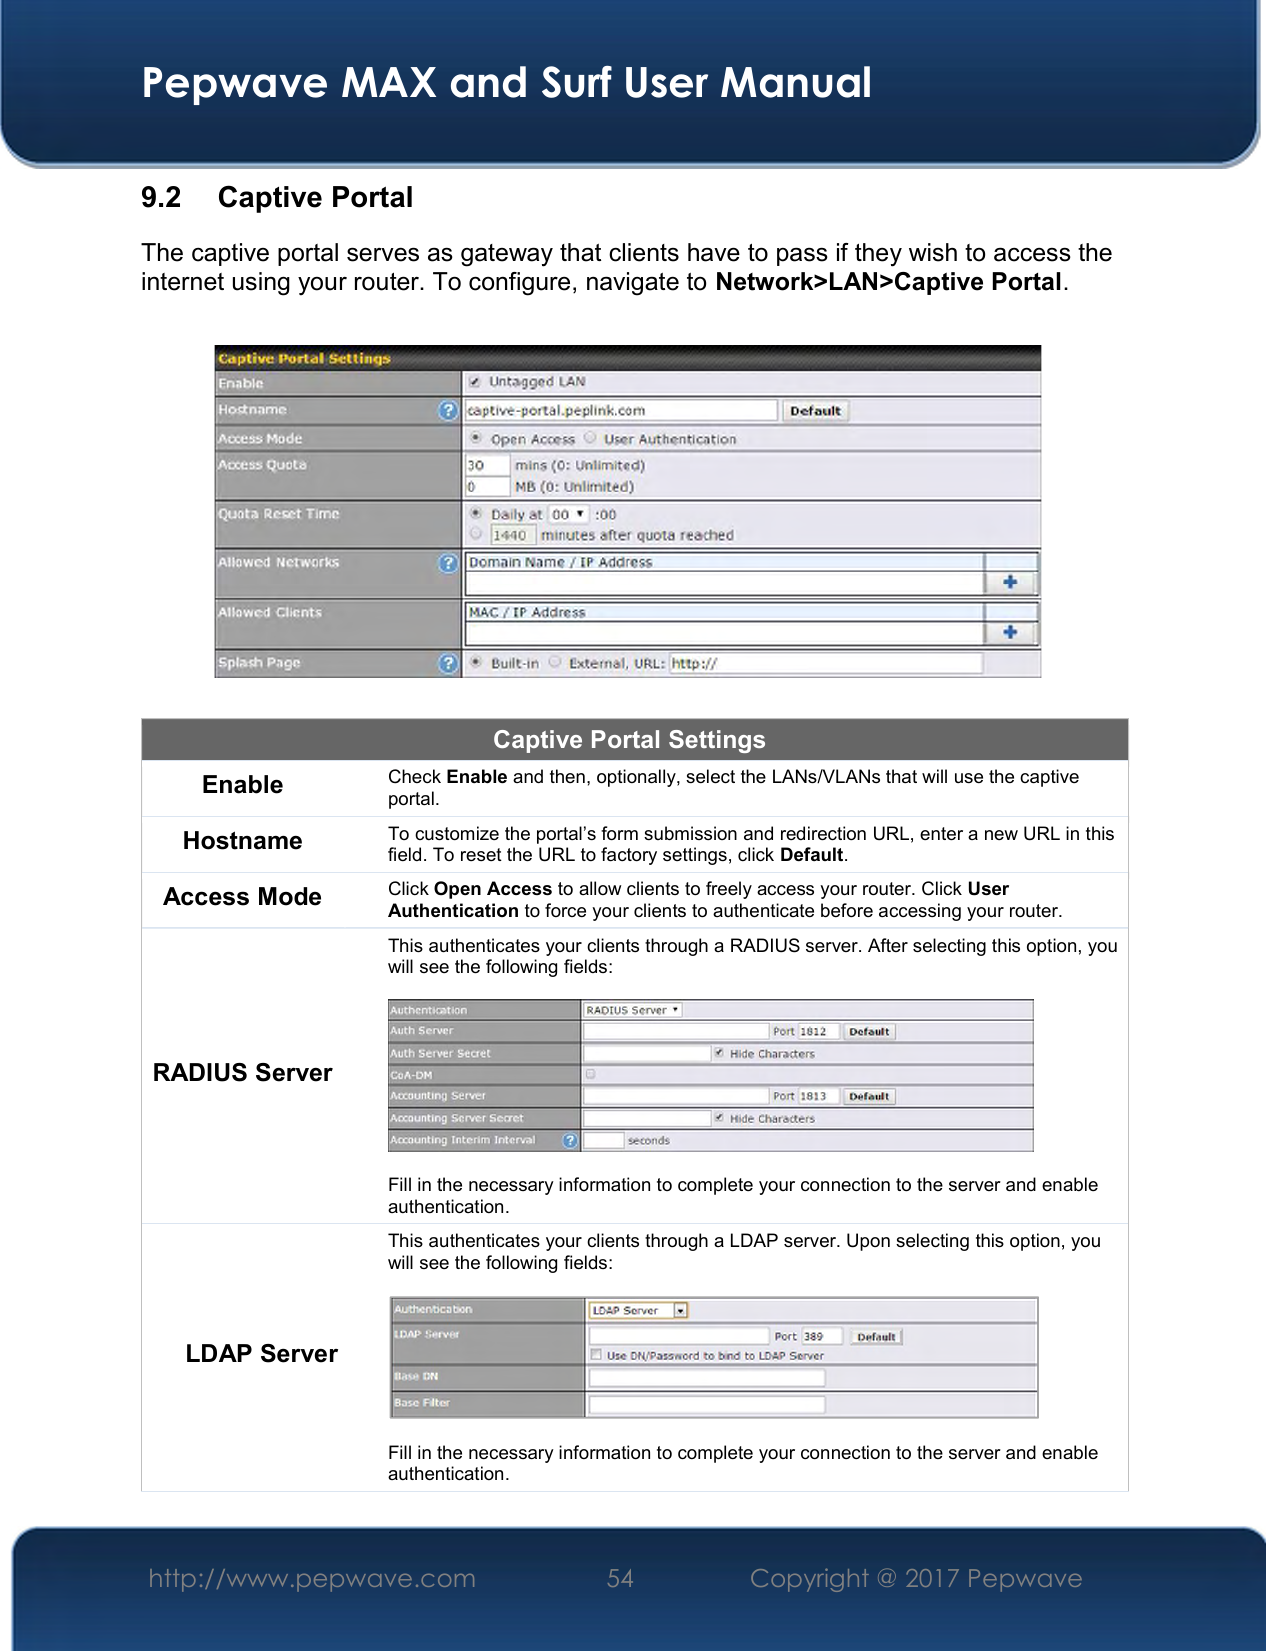  Pepwave MAX and Surf User Manual http://www.pepwave.com  54    Copyright @ 2017 Pepwave   9.2  Captive Portal The captive portal serves as gateway that clients have to pass if they wish to access the internet using your router. To configure, navigate to Network&gt;LAN&gt;Captive Portal.    Captive Portal Settings Enable Check Enable and then, optionally, select the LANs/VLANs that will use the captive portal.  Hostname  To customize the portal’s form submission and redirection URL, enter a new URL in this field. To reset the URL to factory settings, click Default. Access Mode Click Open Access to allow clients to freely access your router. Click User Authentication to force your clients to authenticate before accessing your router. RADIUS Server This authenticates your clients through a RADIUS server. After selecting this option, you will see the following fields:    Fill in the necessary information to complete your connection to the server and enable authentication. LDAP Server This authenticates your clients through a LDAP server. Upon selecting this option, you will see the following fields:    Fill in the necessary information to complete your connection to the server and enable authentication. 